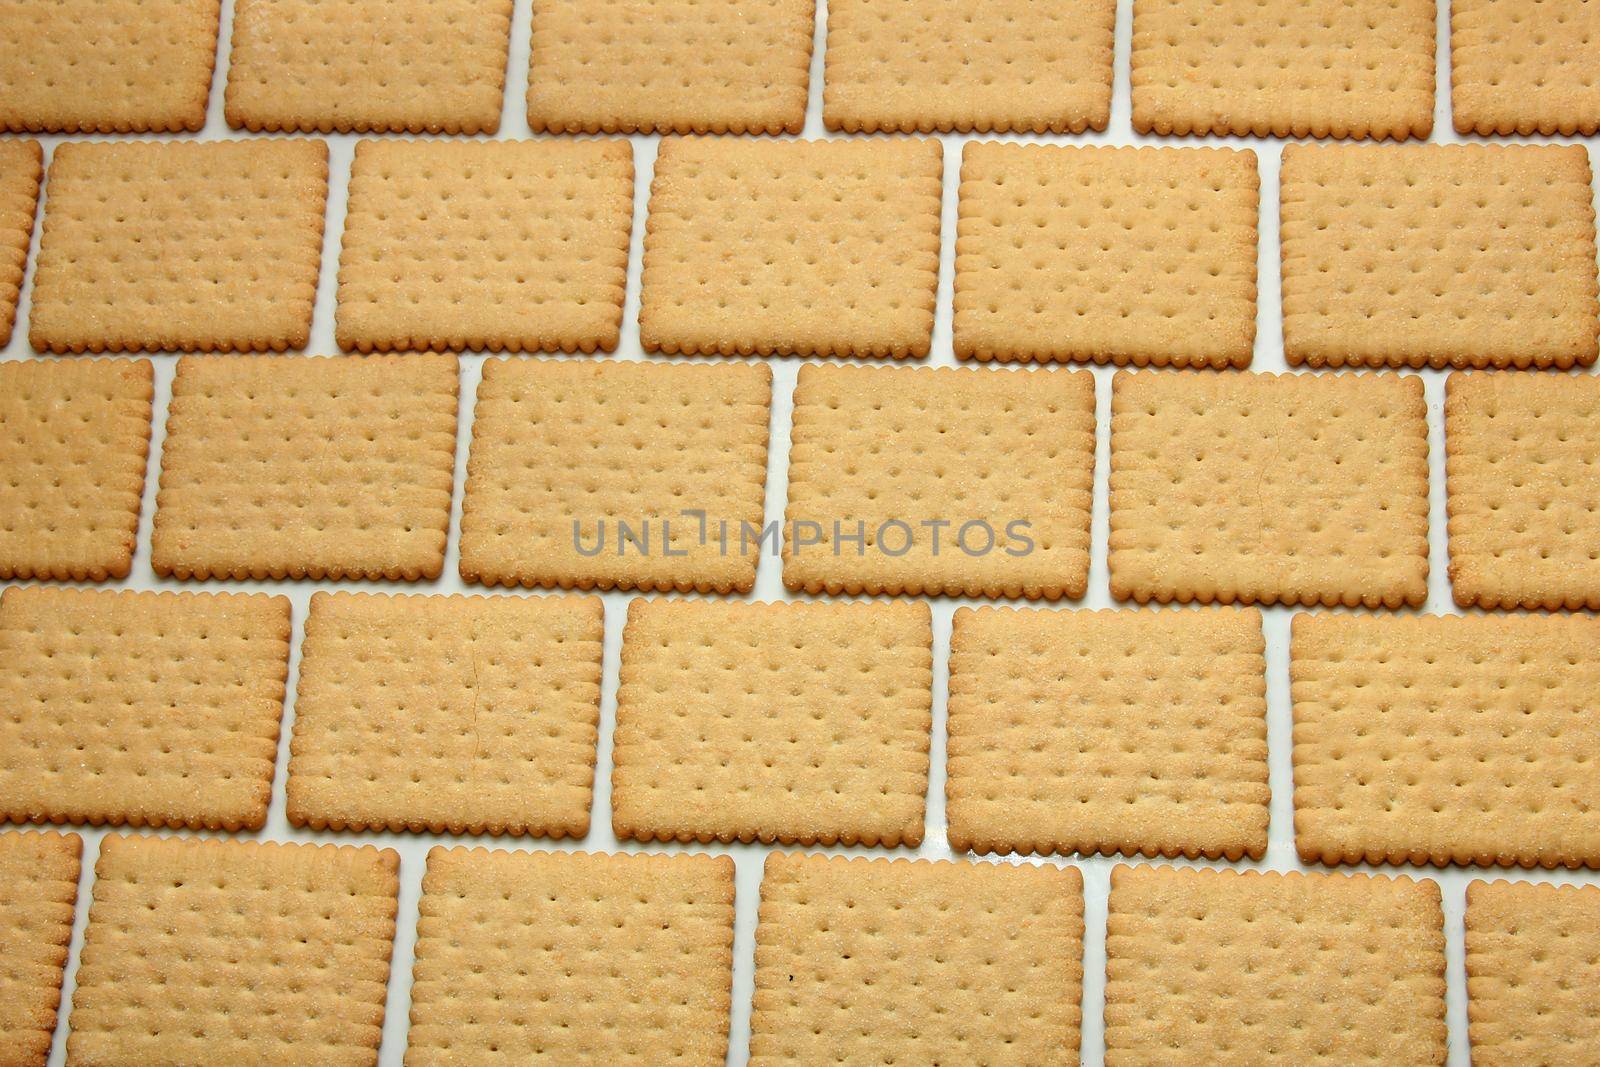 Plain biscuits in a brick pattern, cookie wall by studioportosabbia